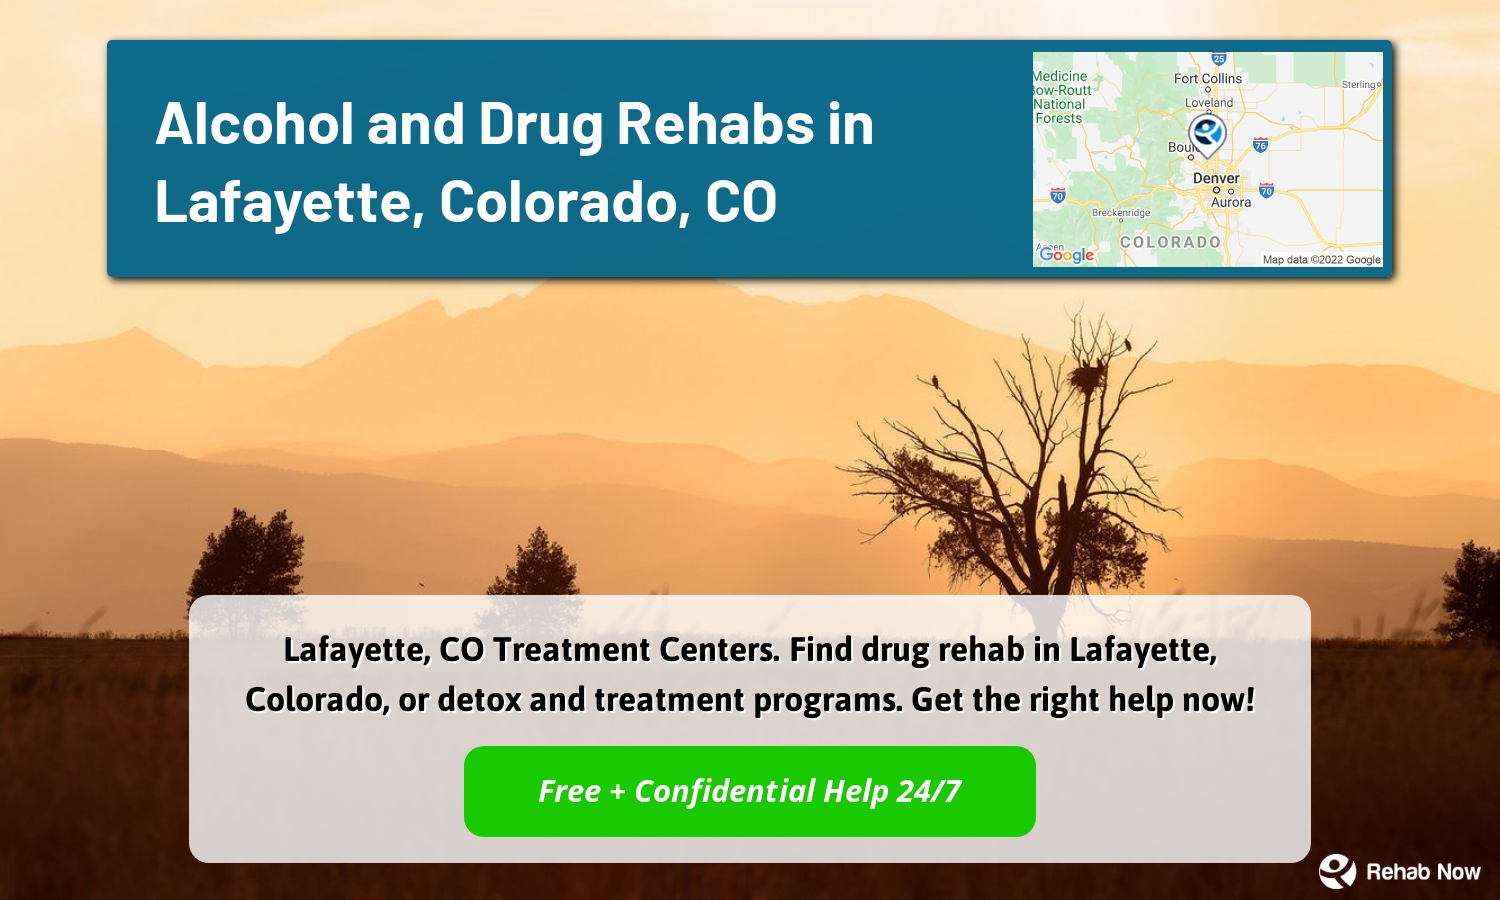 Lafayette, CO Treatment Centers. Find drug rehab in Lafayette, Colorado, or detox and treatment programs. Get the right help now!